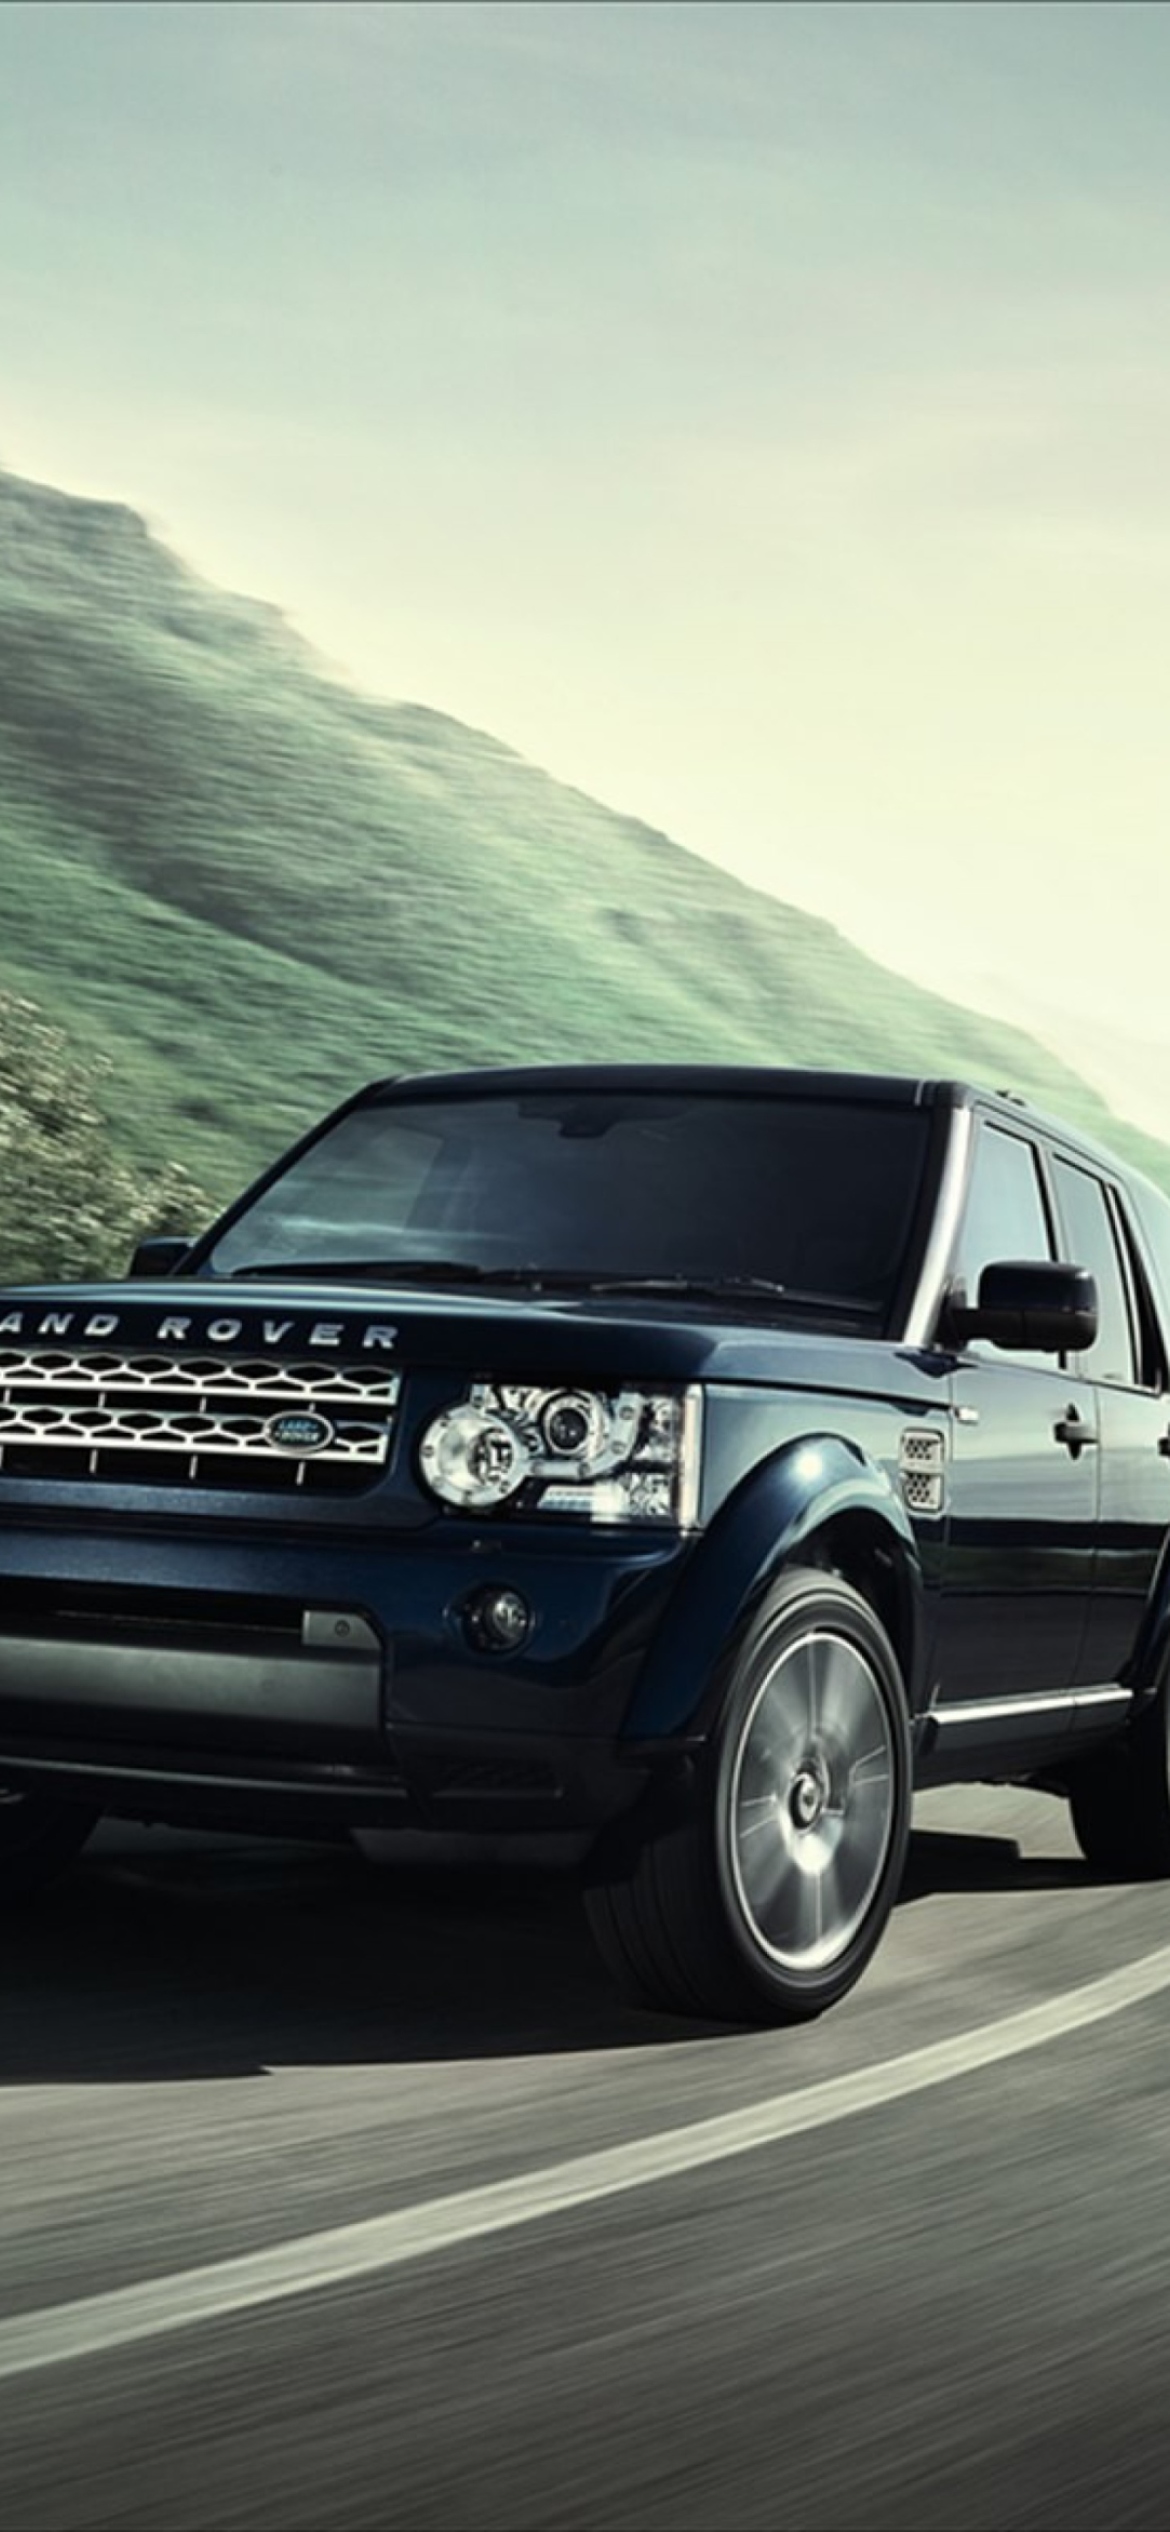 Land Rover Discovery 4 screenshot #1 1170x2532